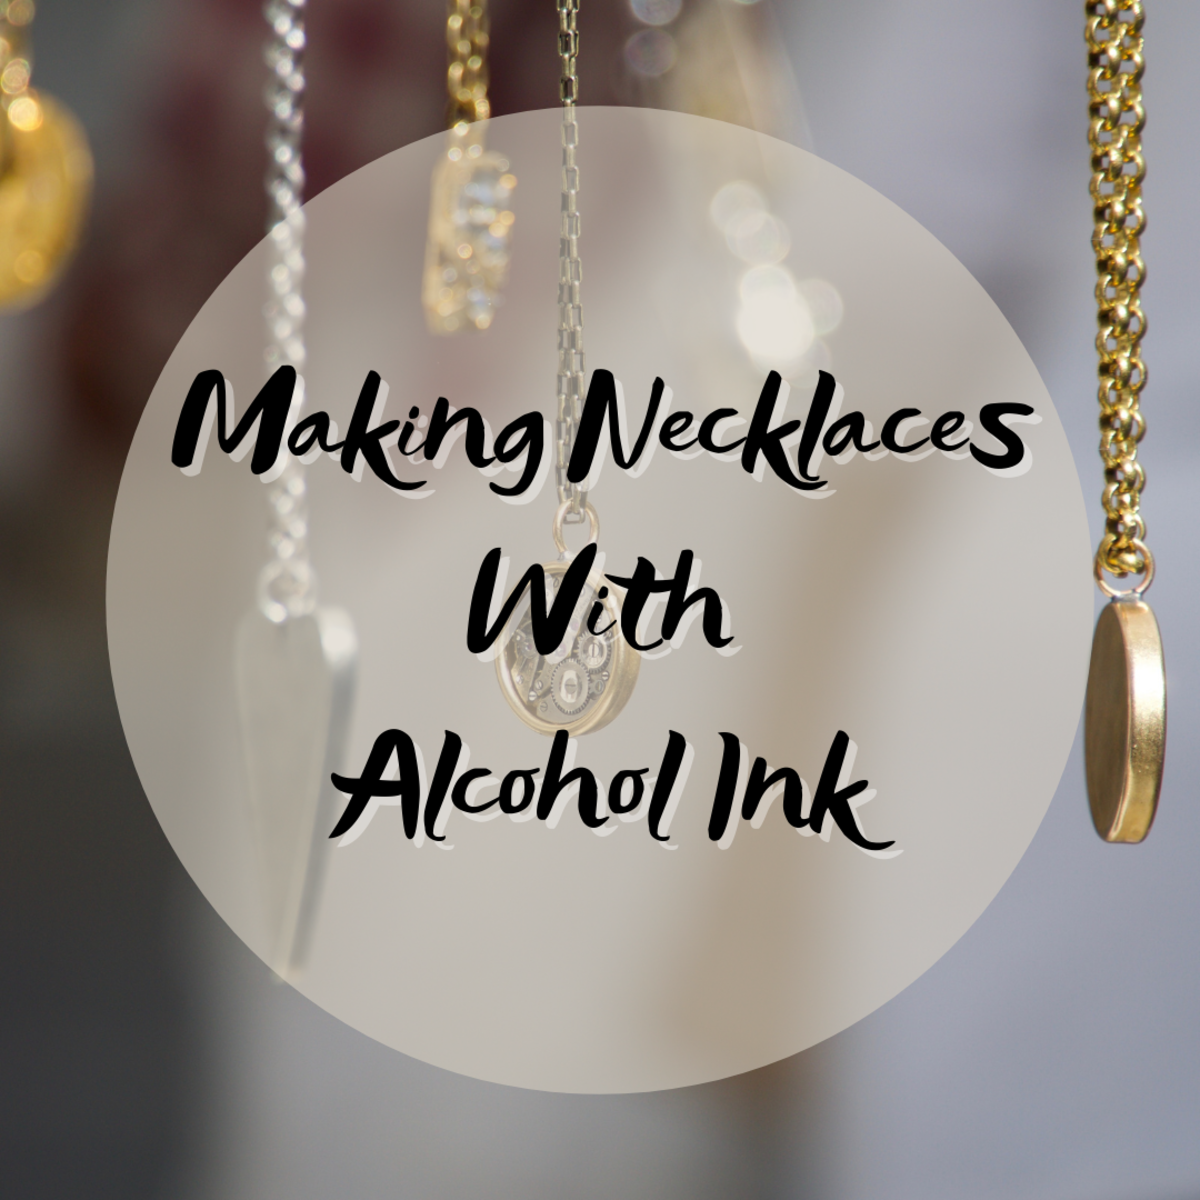 This easy, step-by-step guide teaches you how to create beautiful jewelry using alcohol ink.